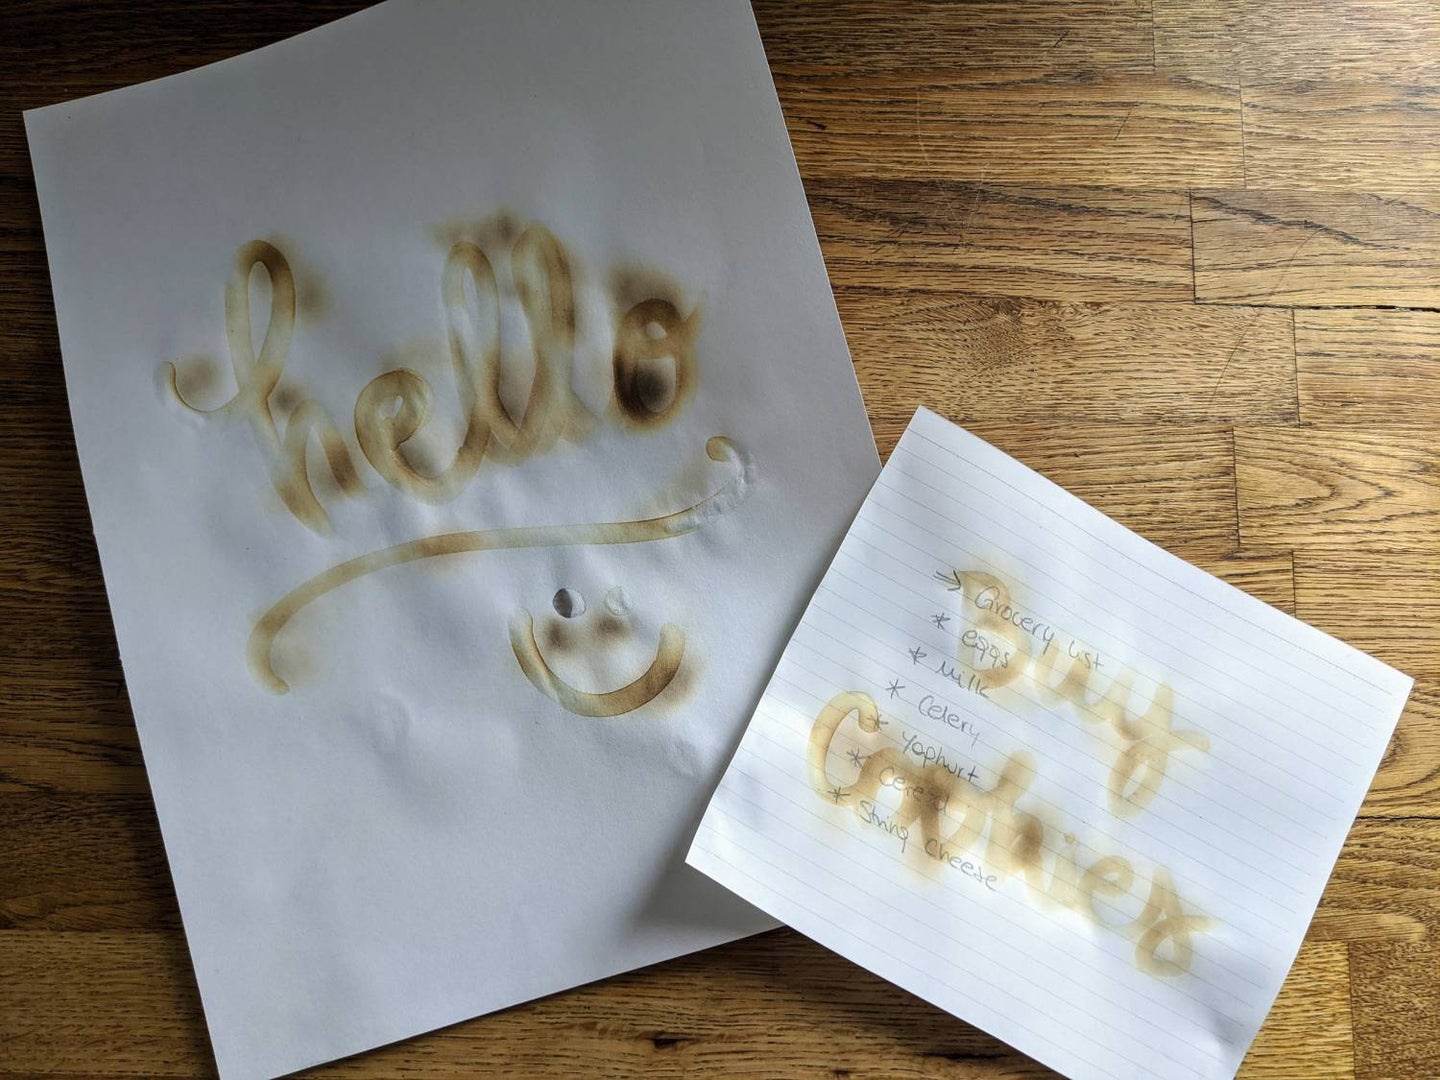 Is It Safe to Burn Paper With Ink on It? 